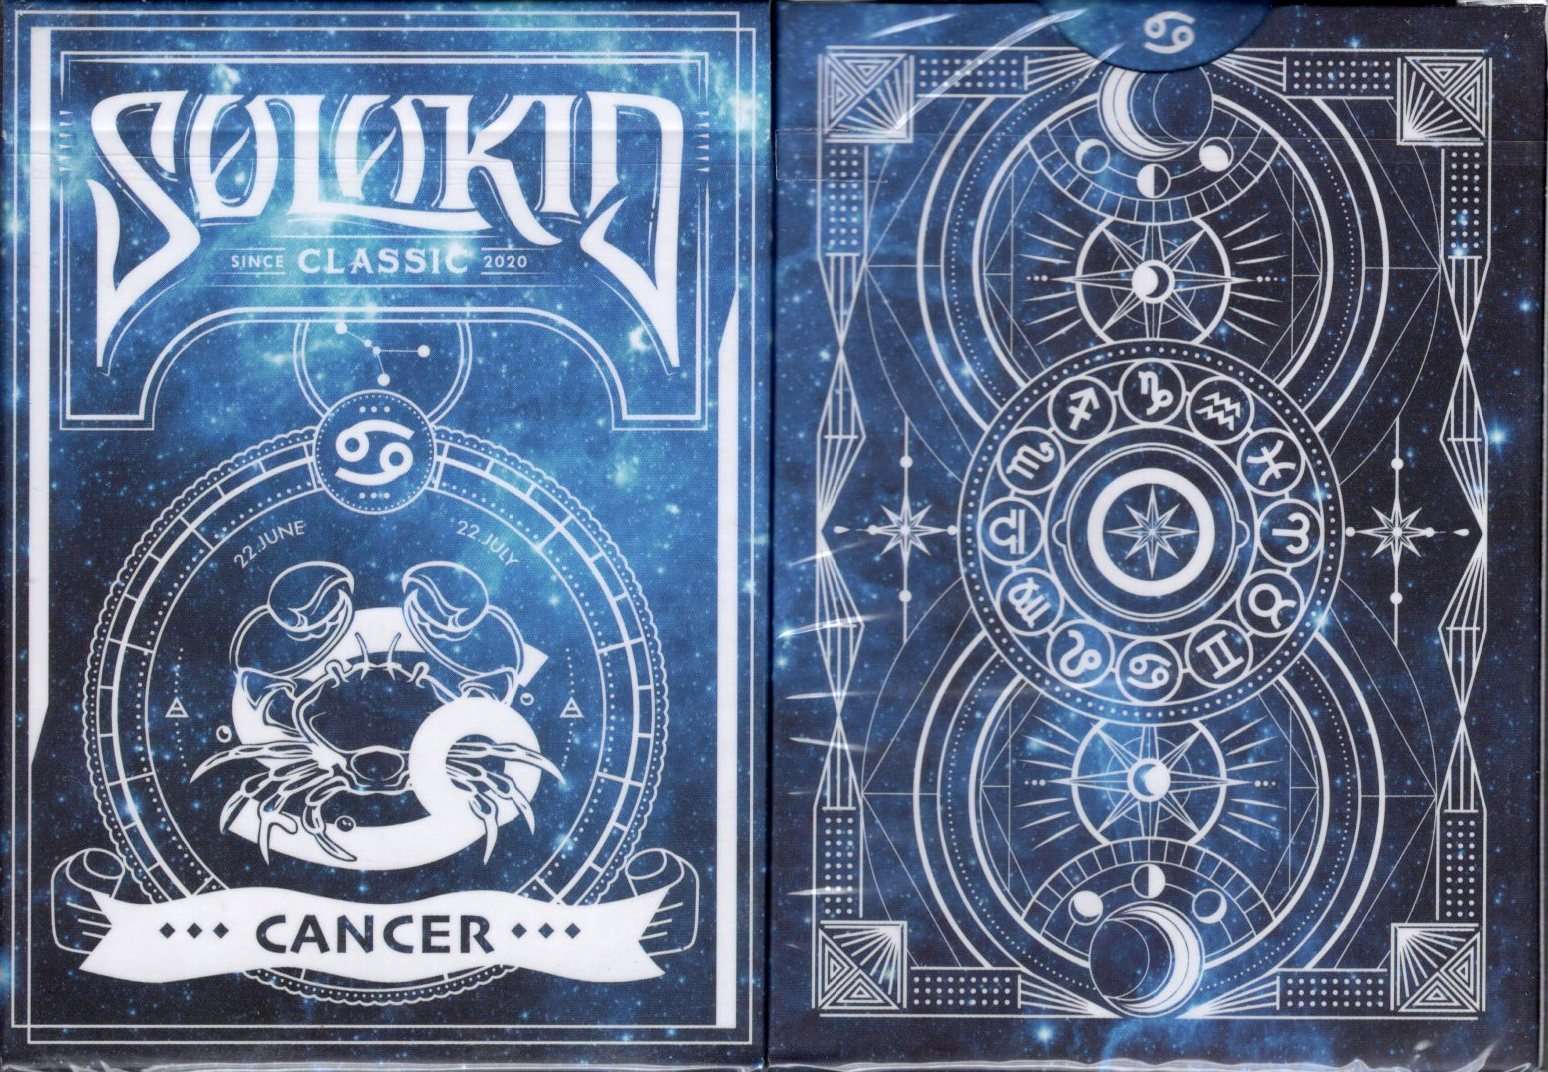 PlayingCardDecks.com-Solokid Constellation Series v2 Cancer Playing Cards MPC